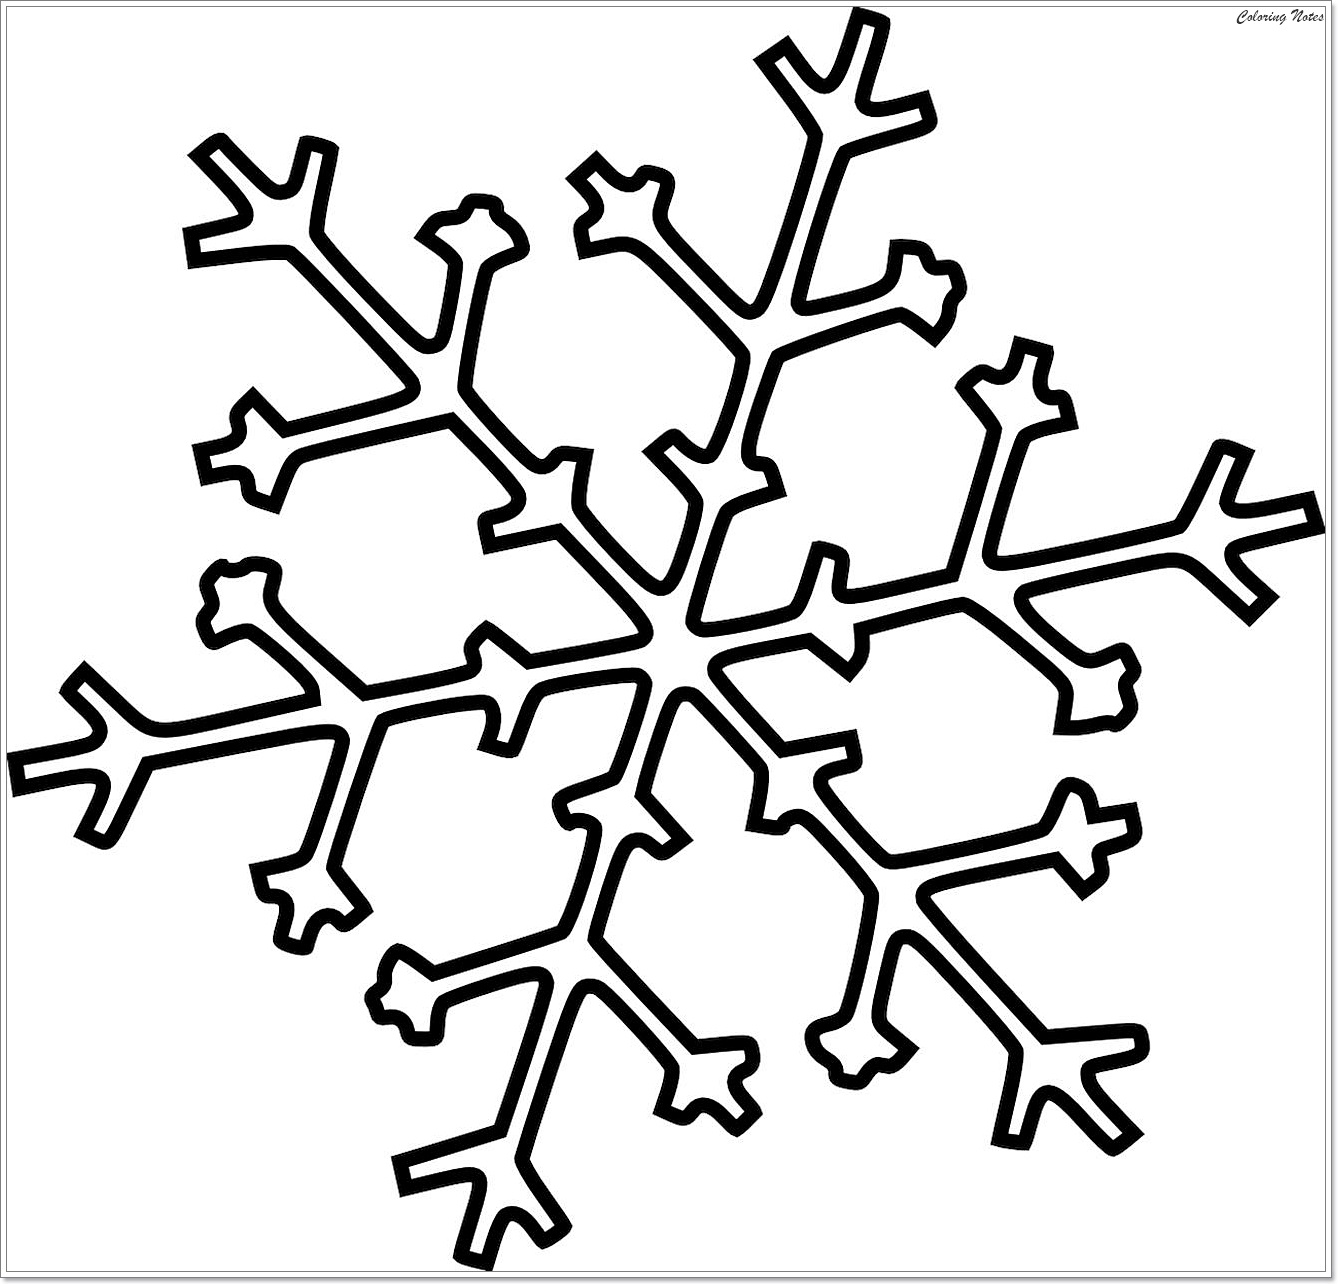 Top 25 Winter Snowflake Coloring Pages Easy, Free and Printable